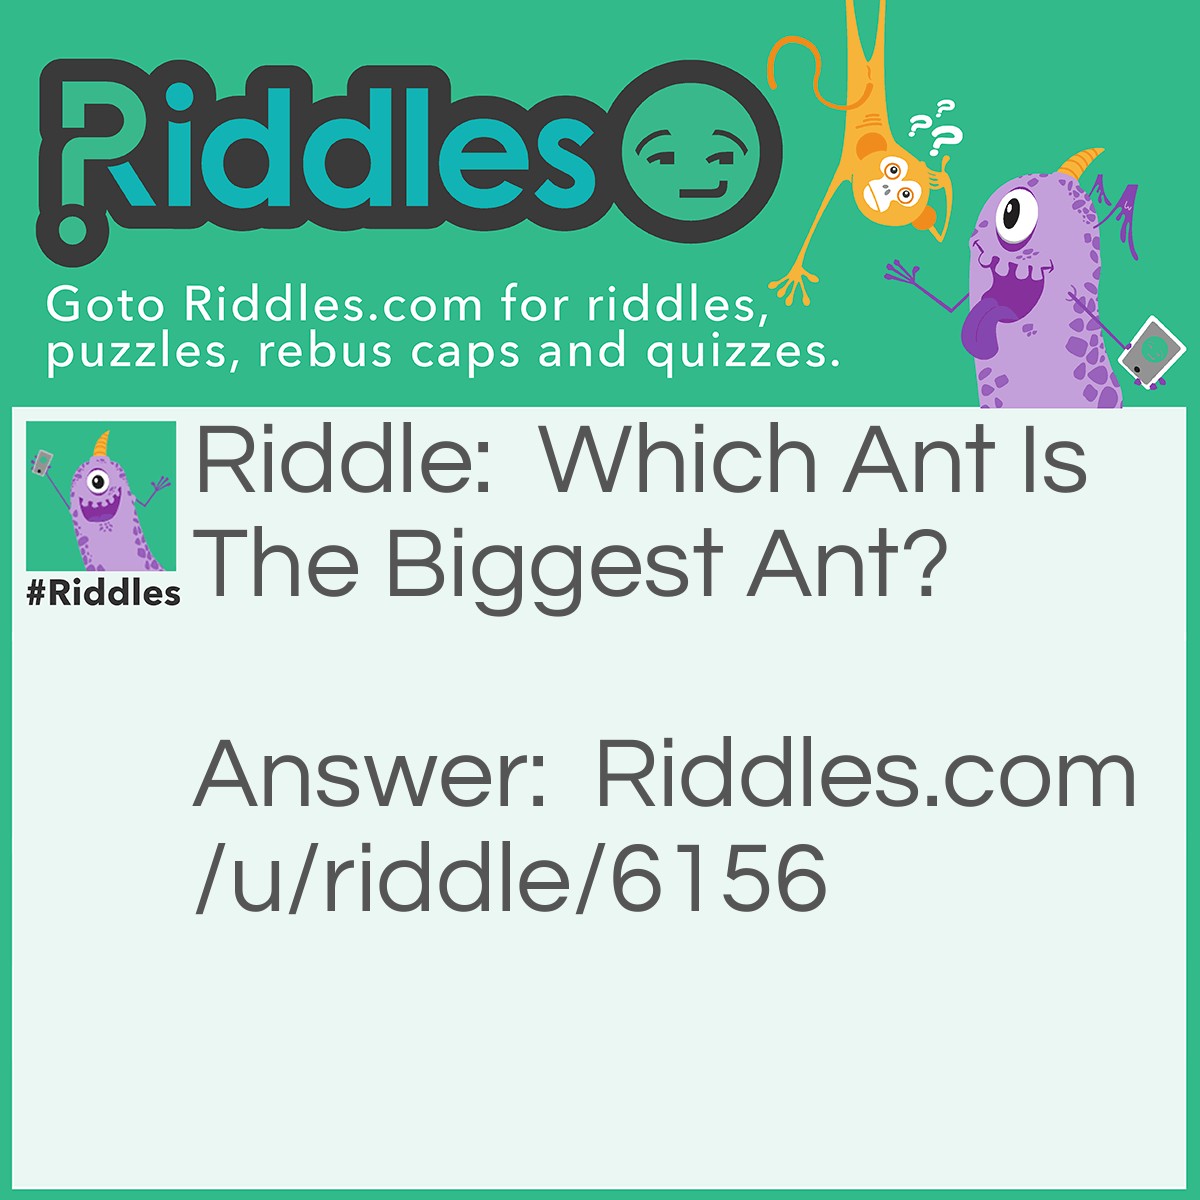 Riddle: Which Ant Is The Biggest Ant? Answer: Eleph"ant"